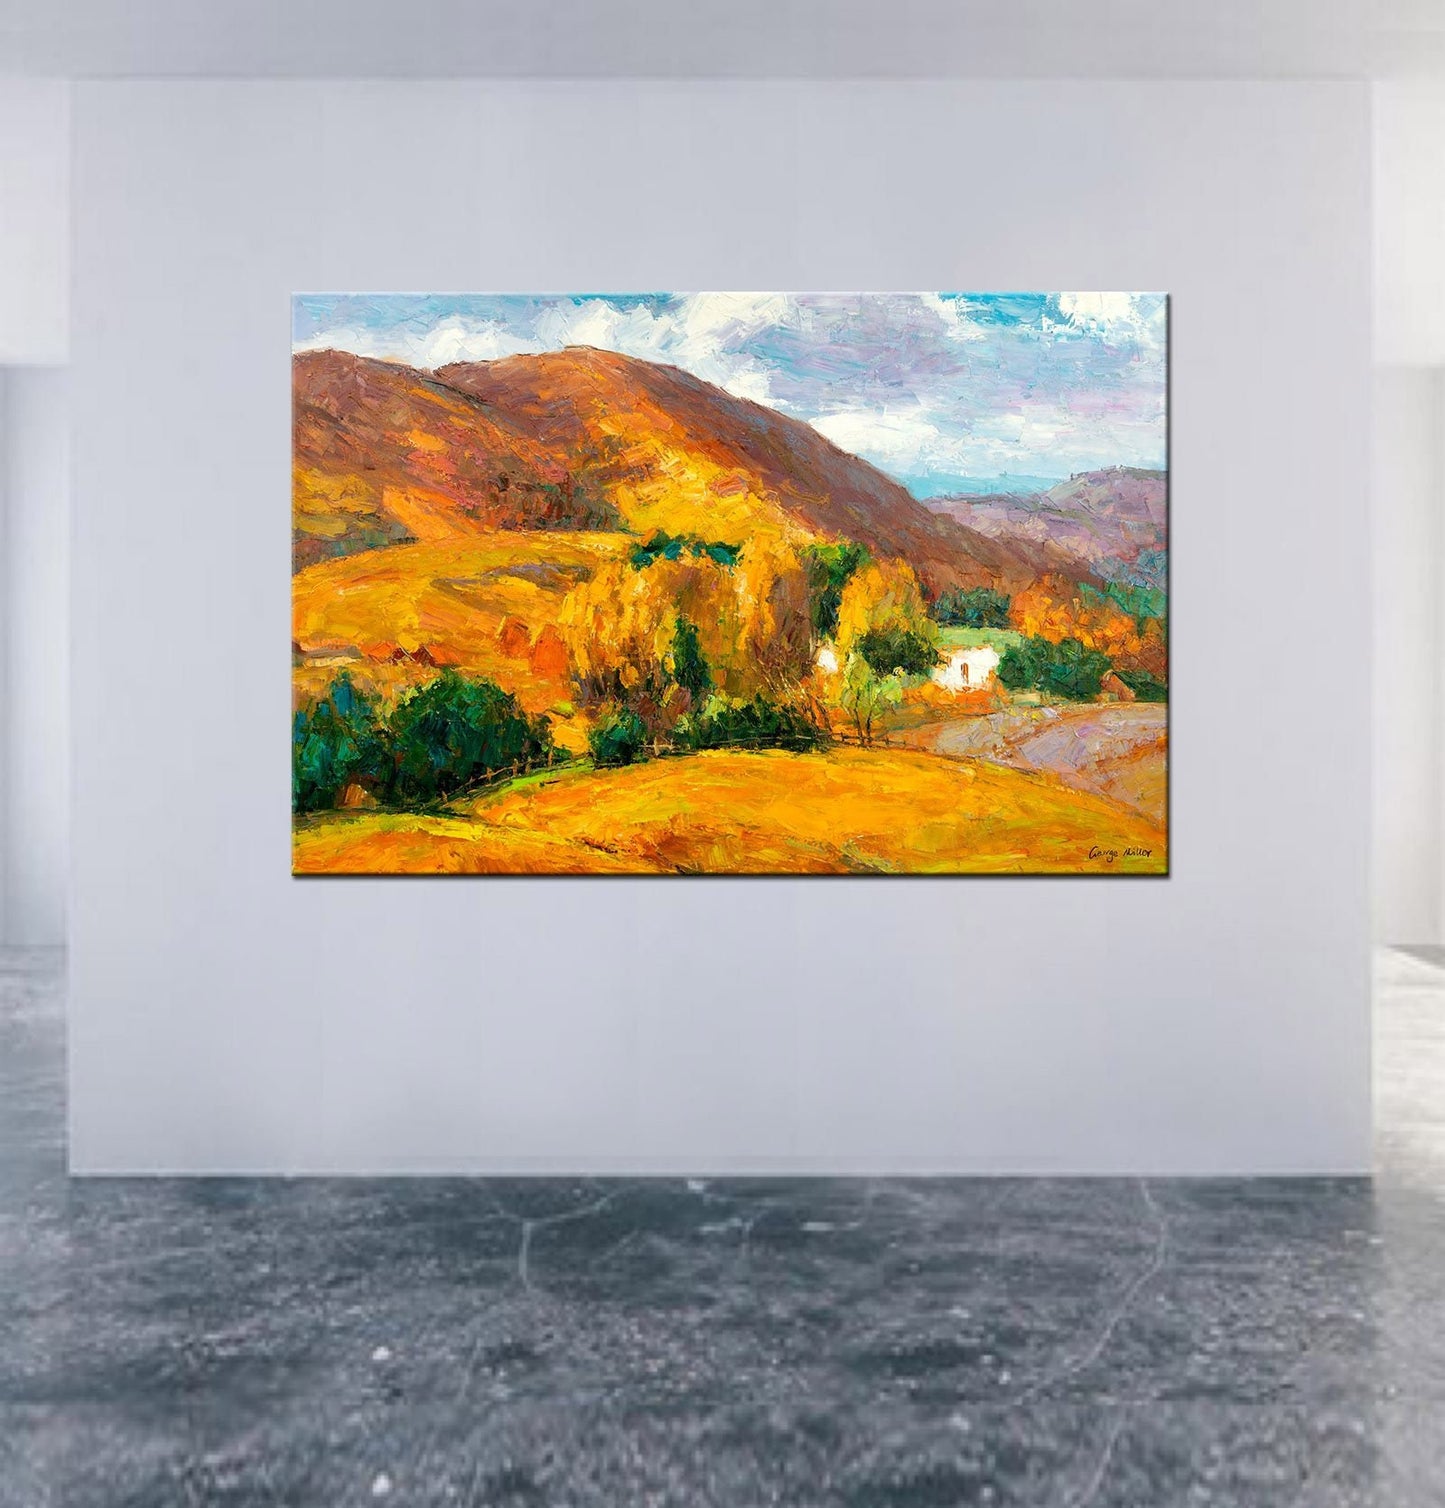 The Perfect Rustic Wall Art - This Impasto Painting of Large Landscape Hills by George Miller is Ideal for Any Home or Office